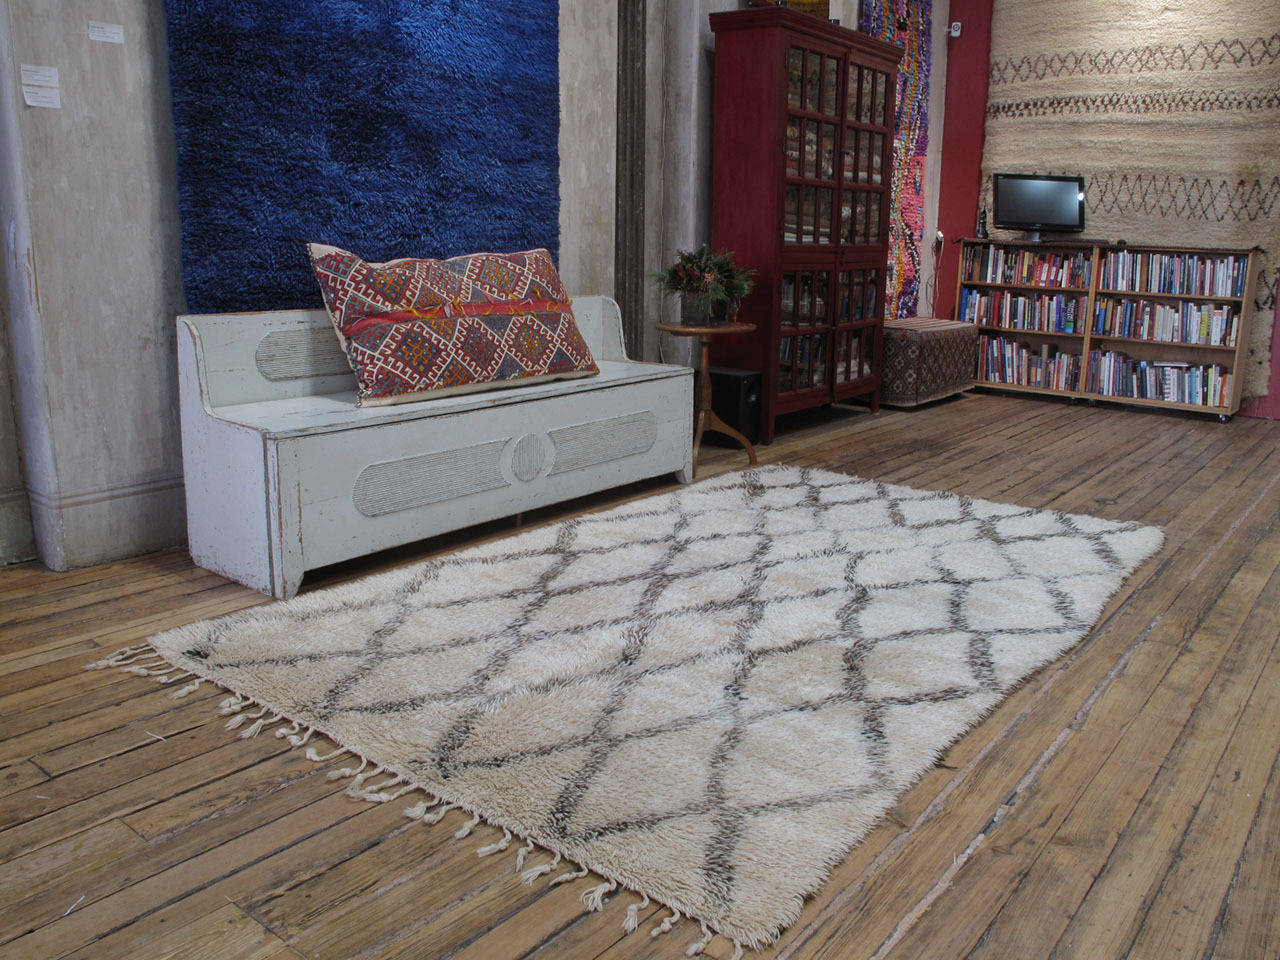 A very charming Moroccan Berber rug by the Beni Ouarain tribes of the middle Atlas Mountains, who used these large rugs as beds in their tents and cottages. The Classic diamond grid design is executed with pleasing irregularities. The wool has a